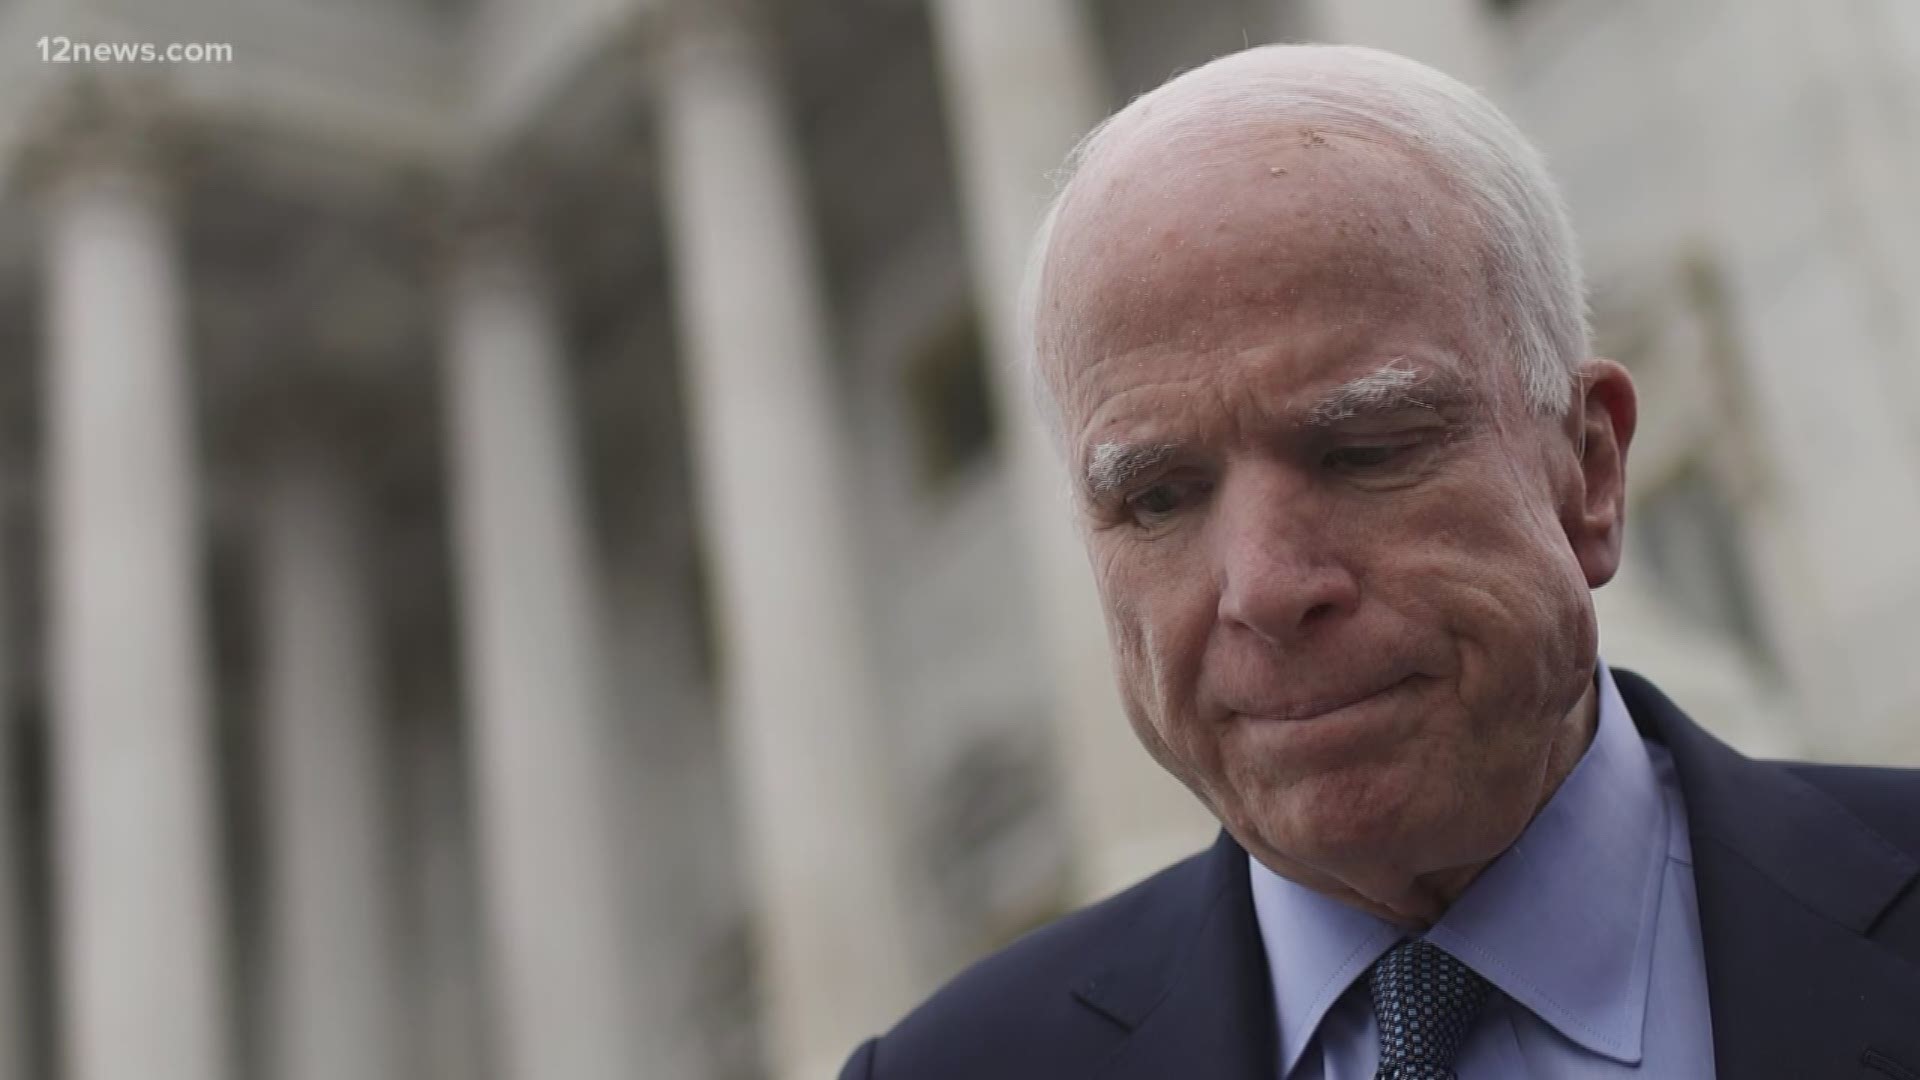 Sen. John McCain has been admitted to the Mayo Clinic in Phoenix for surgery on an intestinal infection, a statement from his office said Monday.